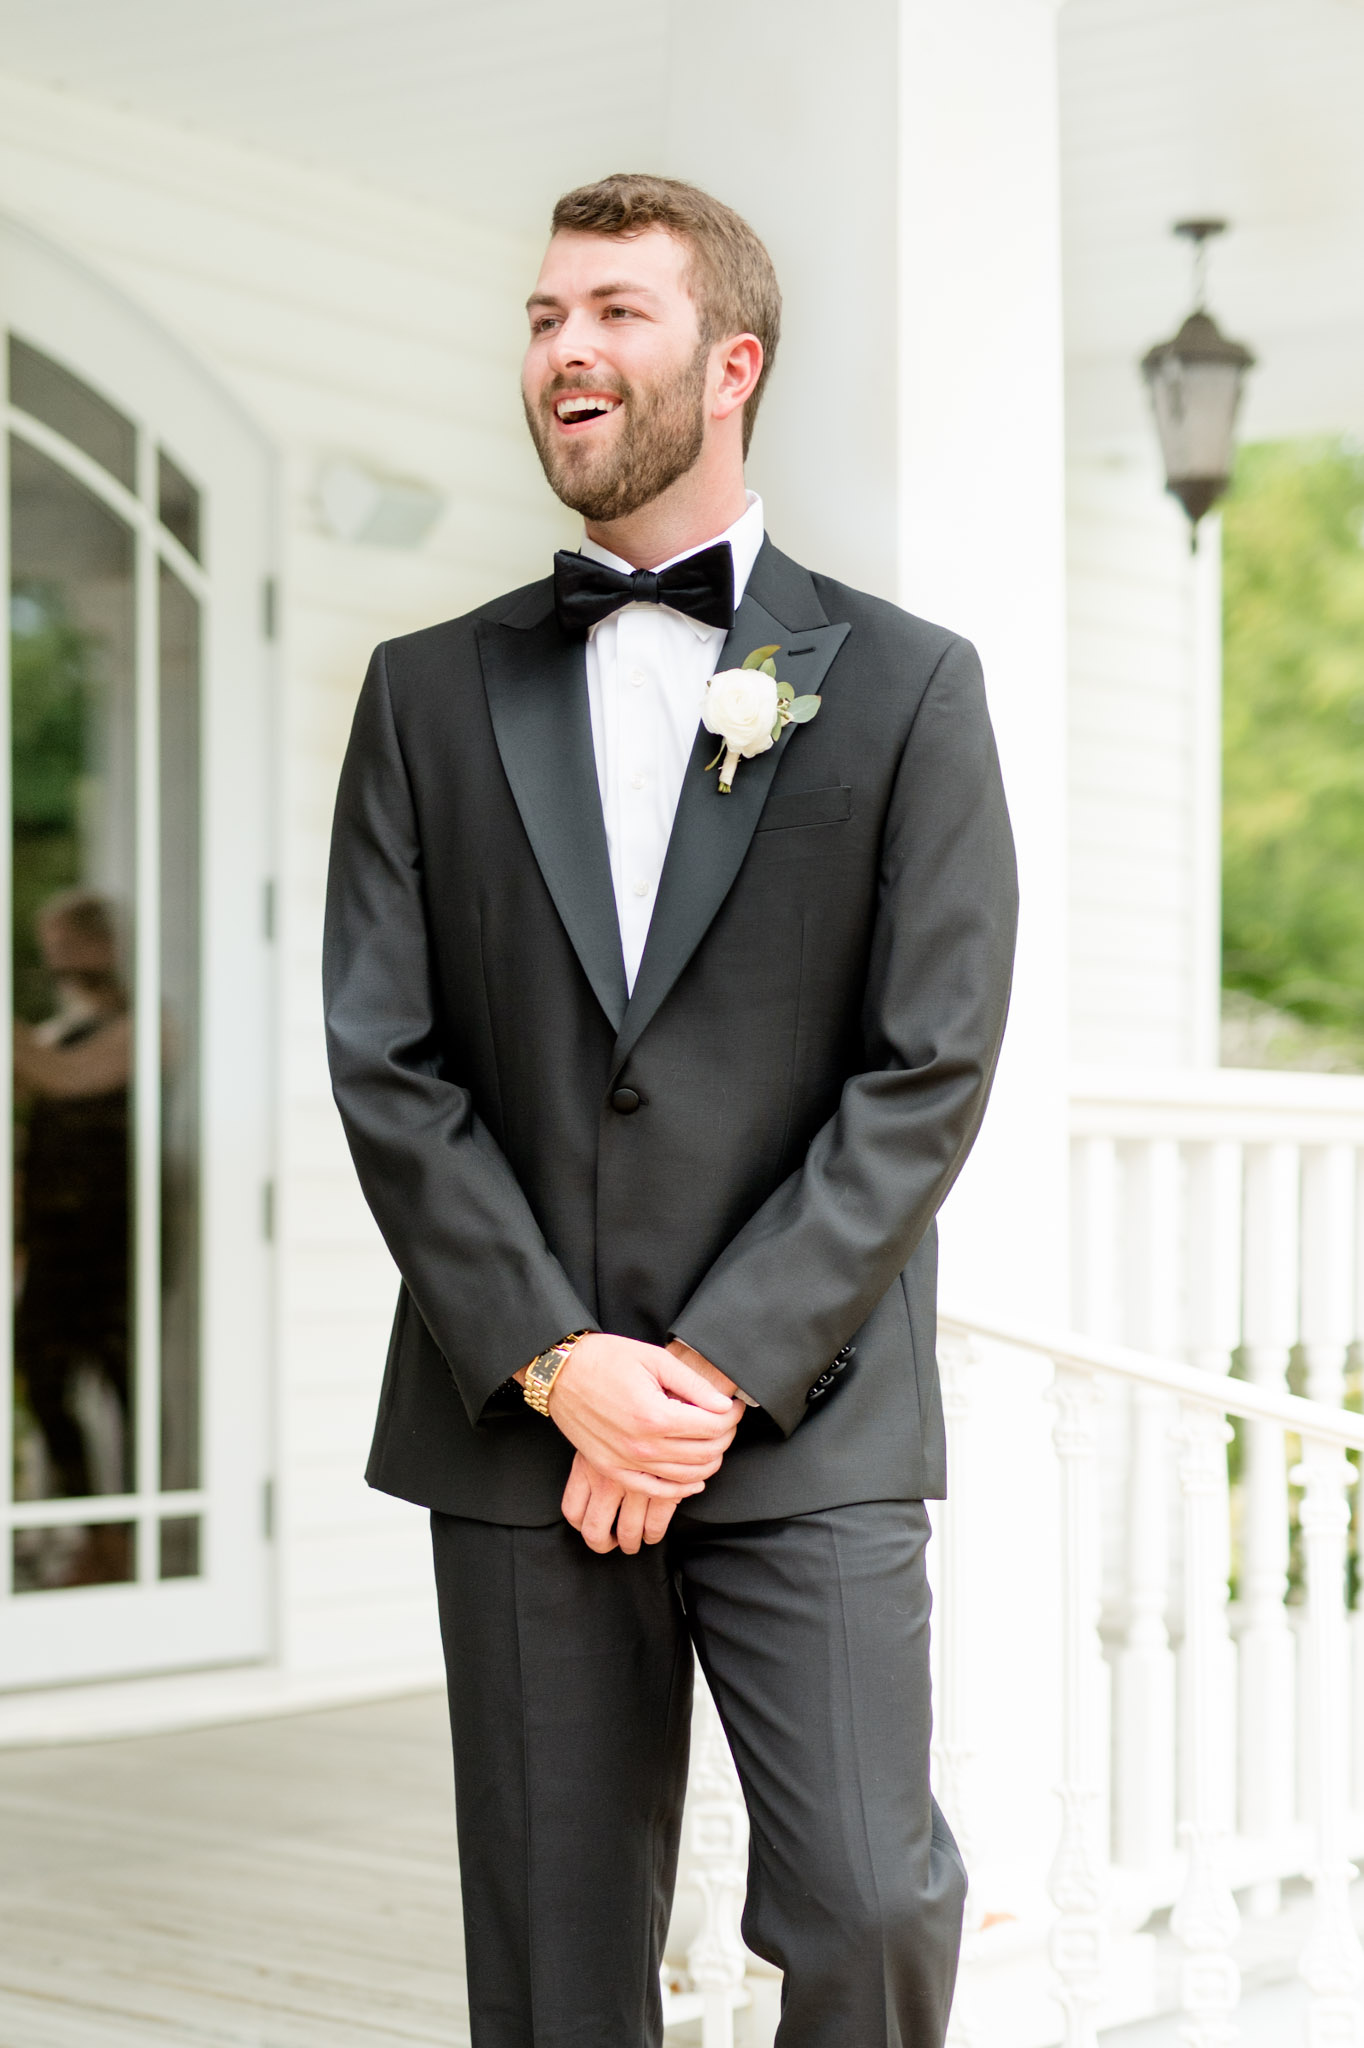 Groom smiles as he sees the bride for the first look.